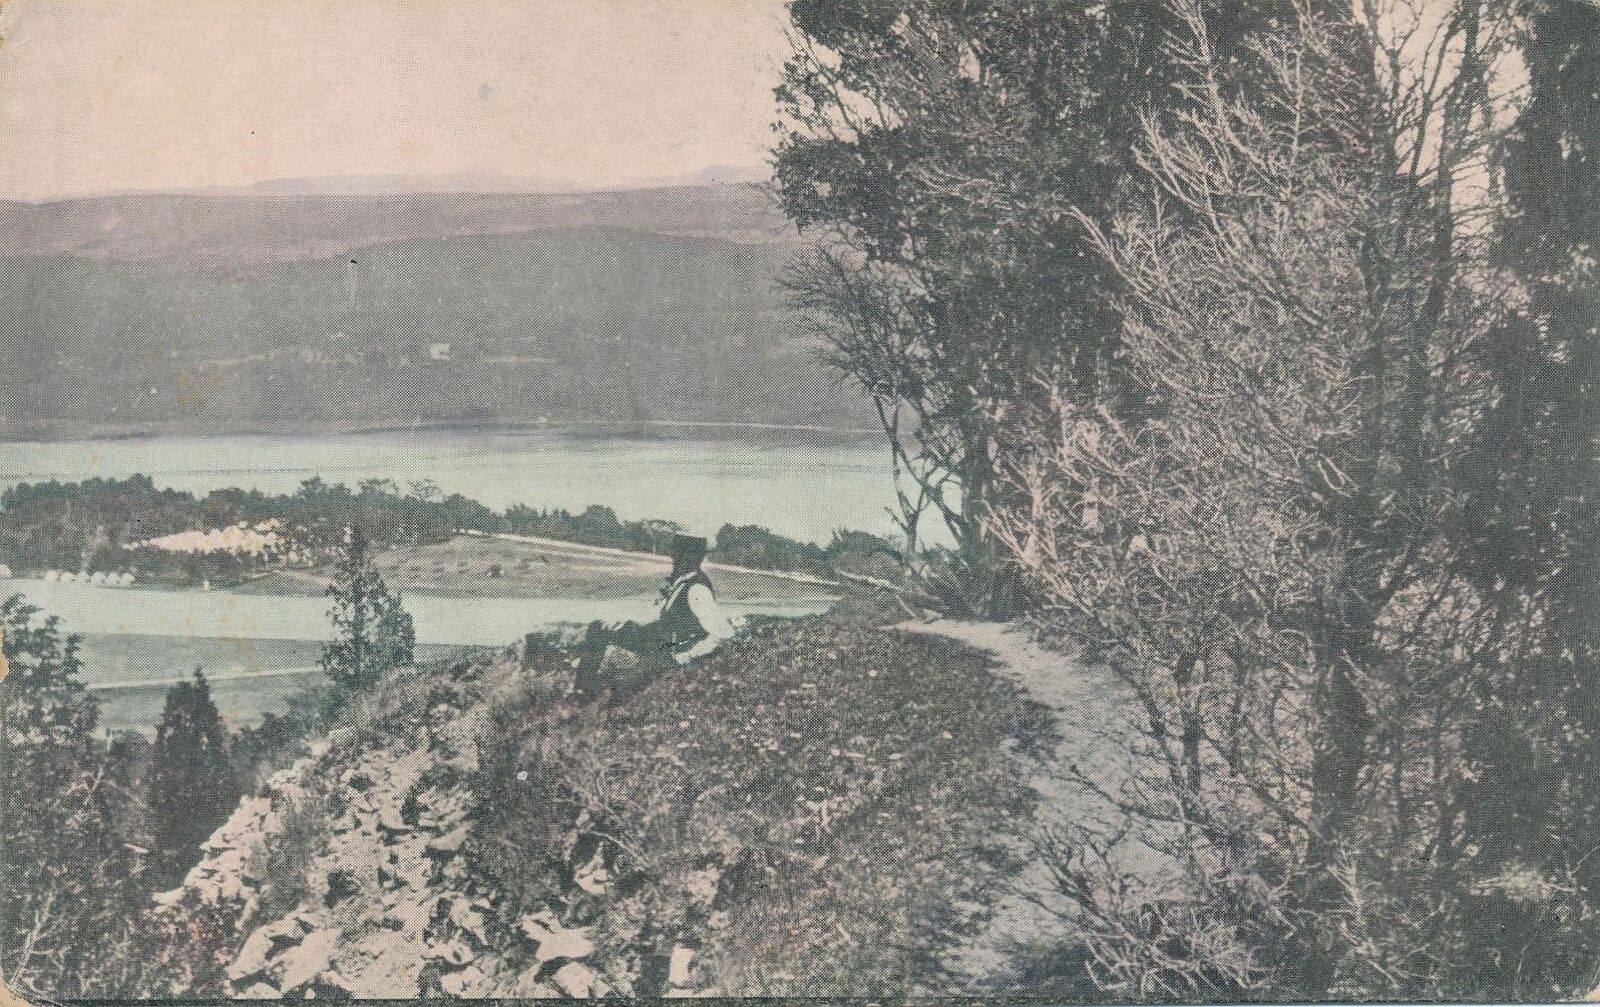 WEST POINT NY - Cadets\' Encampment Panorama Postcard - 1912